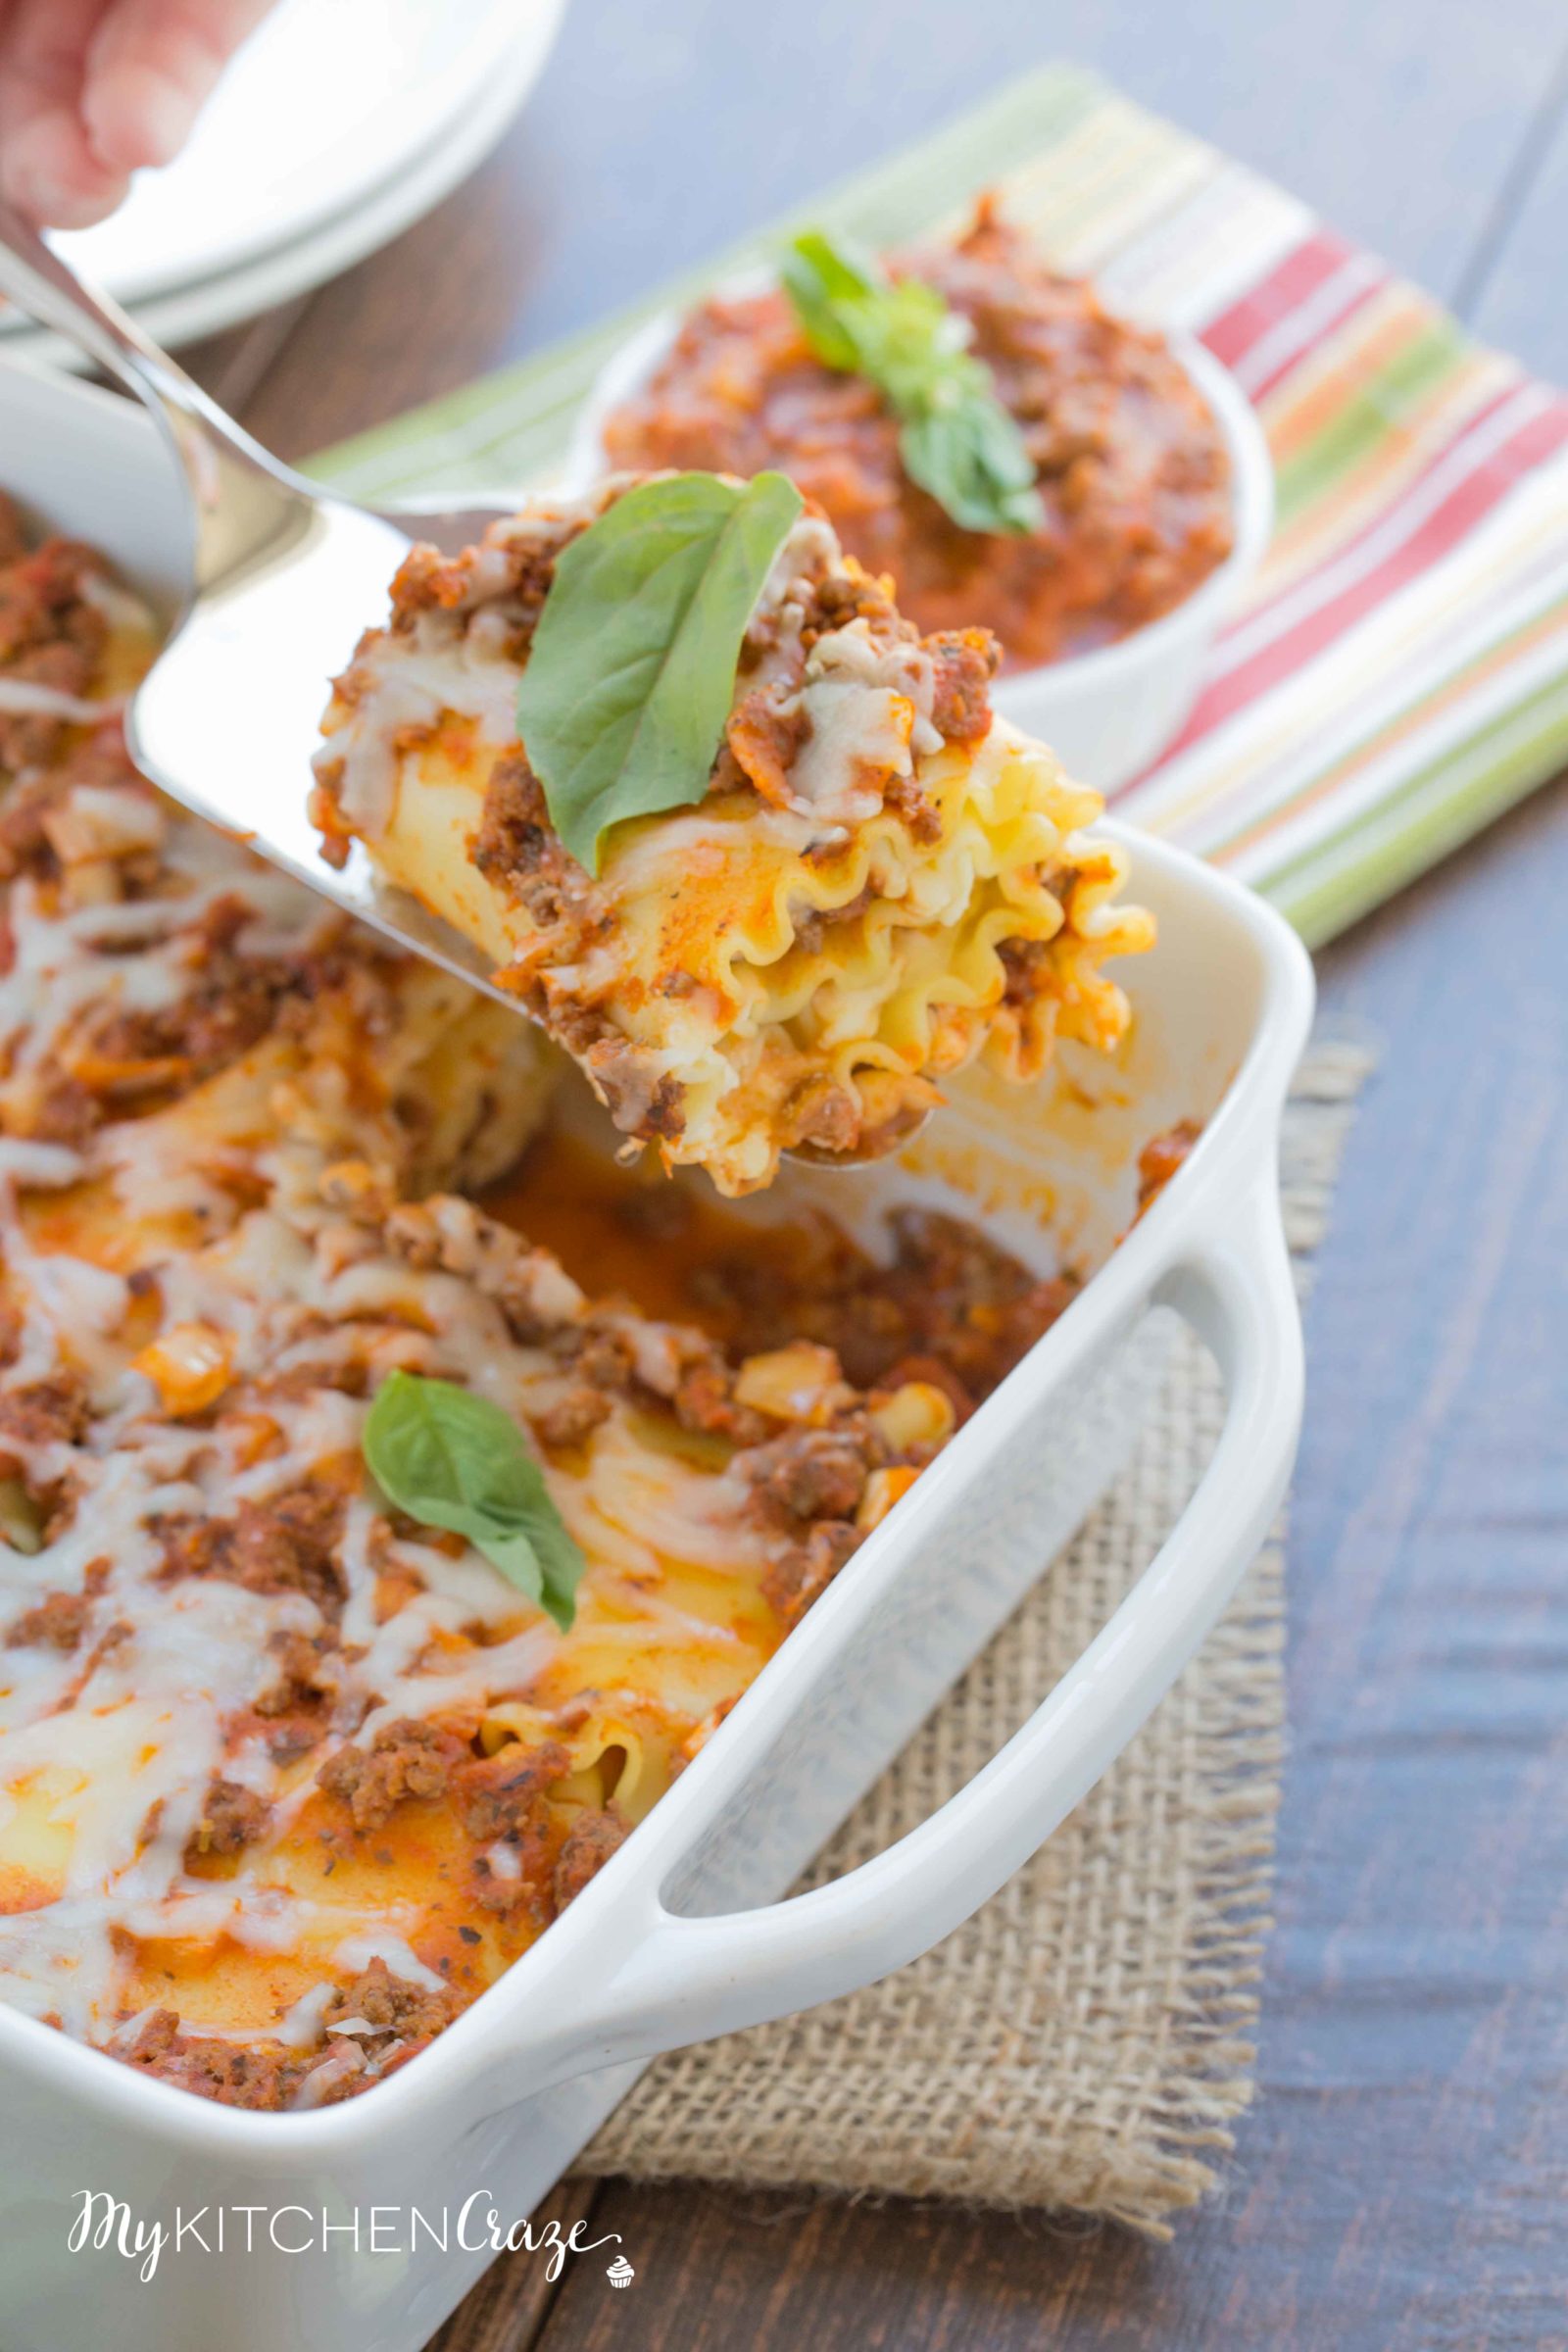 Lasagna Roll-Ups ~ mykitchencraze.com ~ A fun twist and easy way to make lasagna. These roll-ups are filled with everything you'd put in your lasagna, but better. The family will love them!